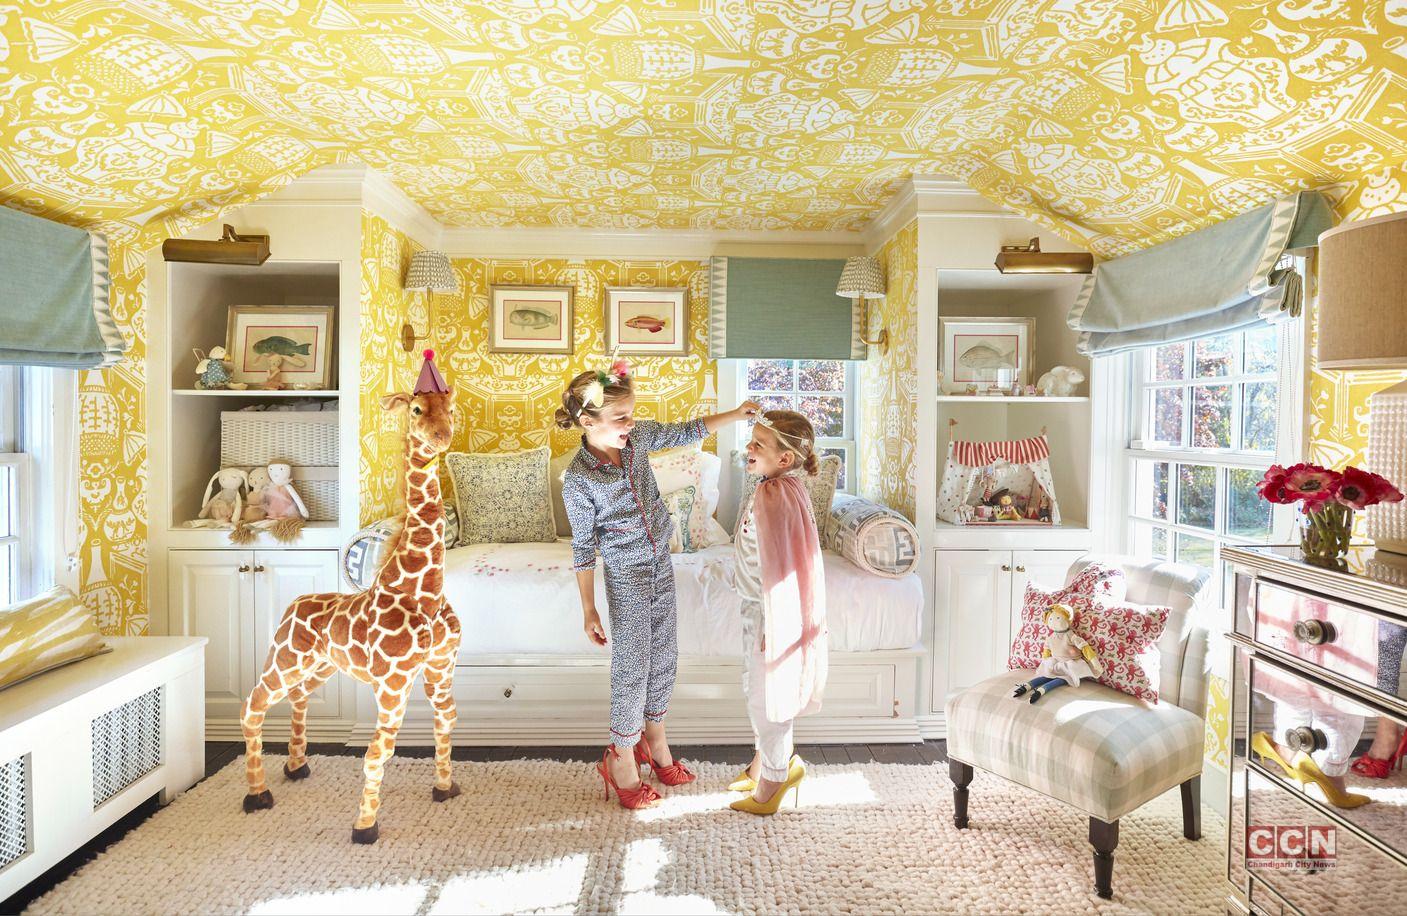 13 Playroom Ideas for Kids: Balancing Fun and Functionality